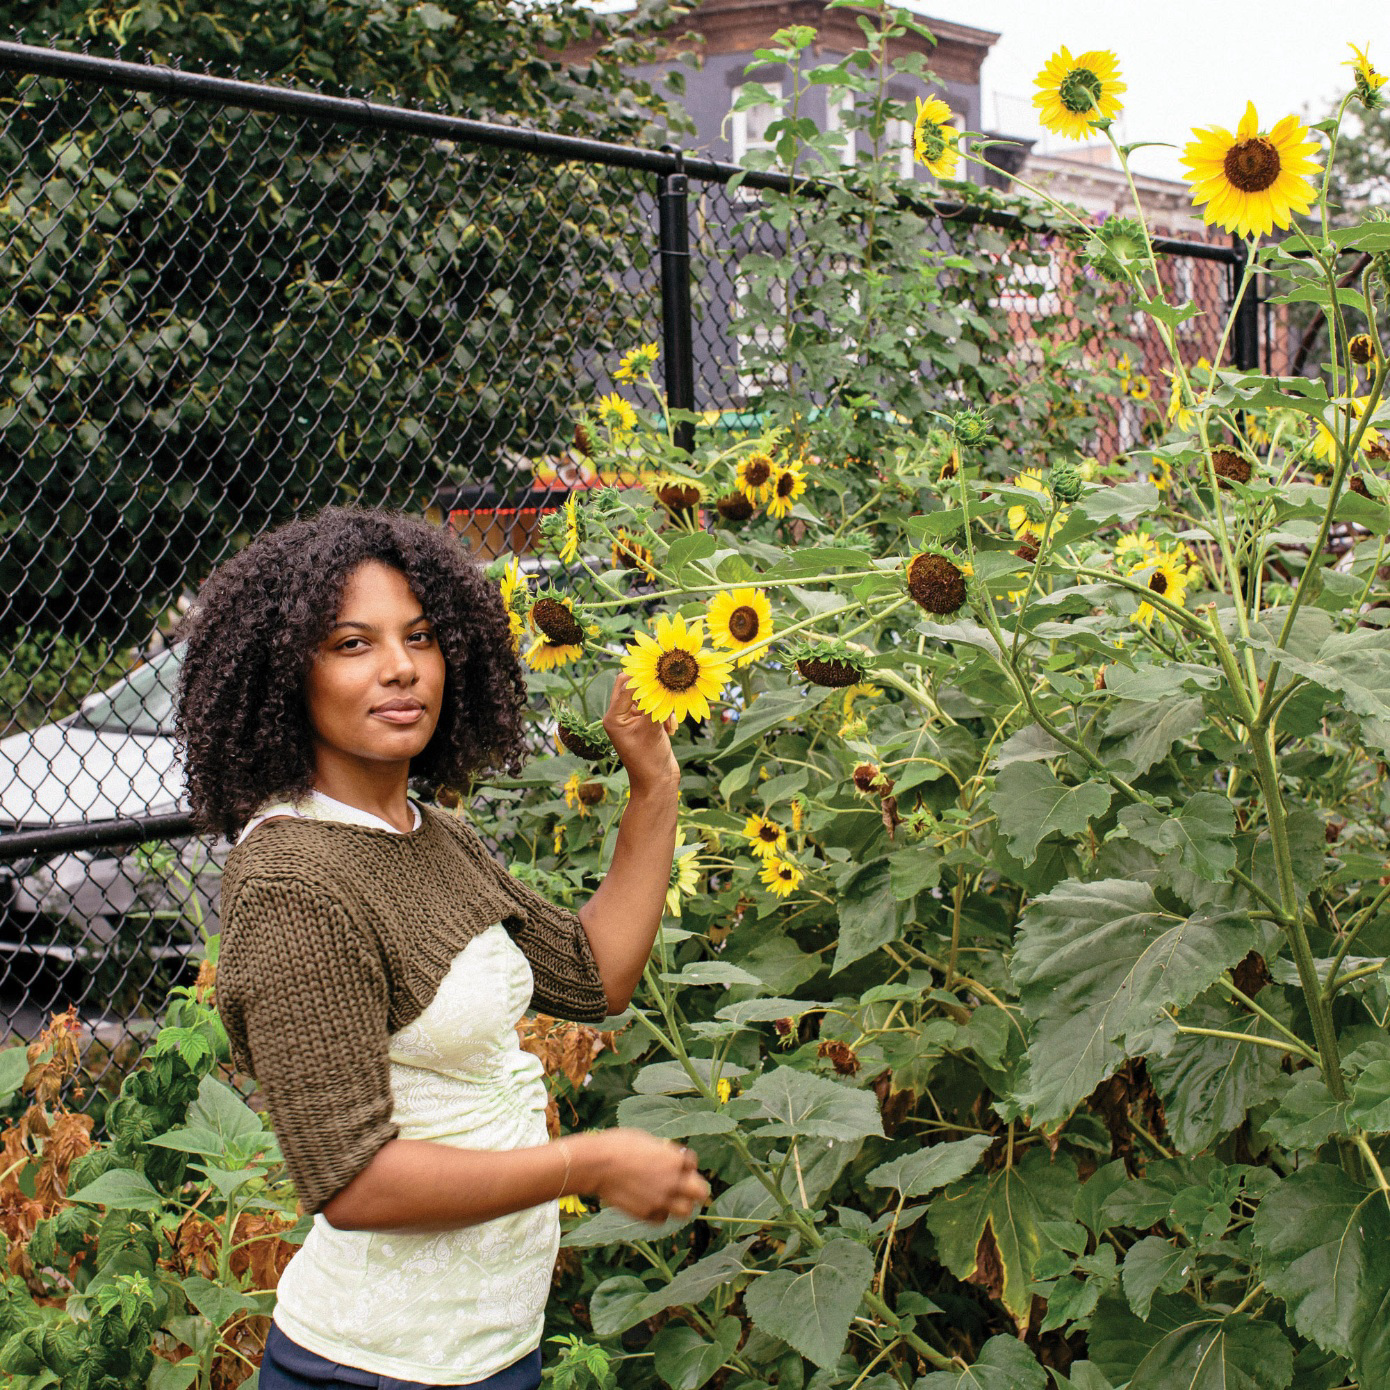 A woman standing in a garden with sunflowers.